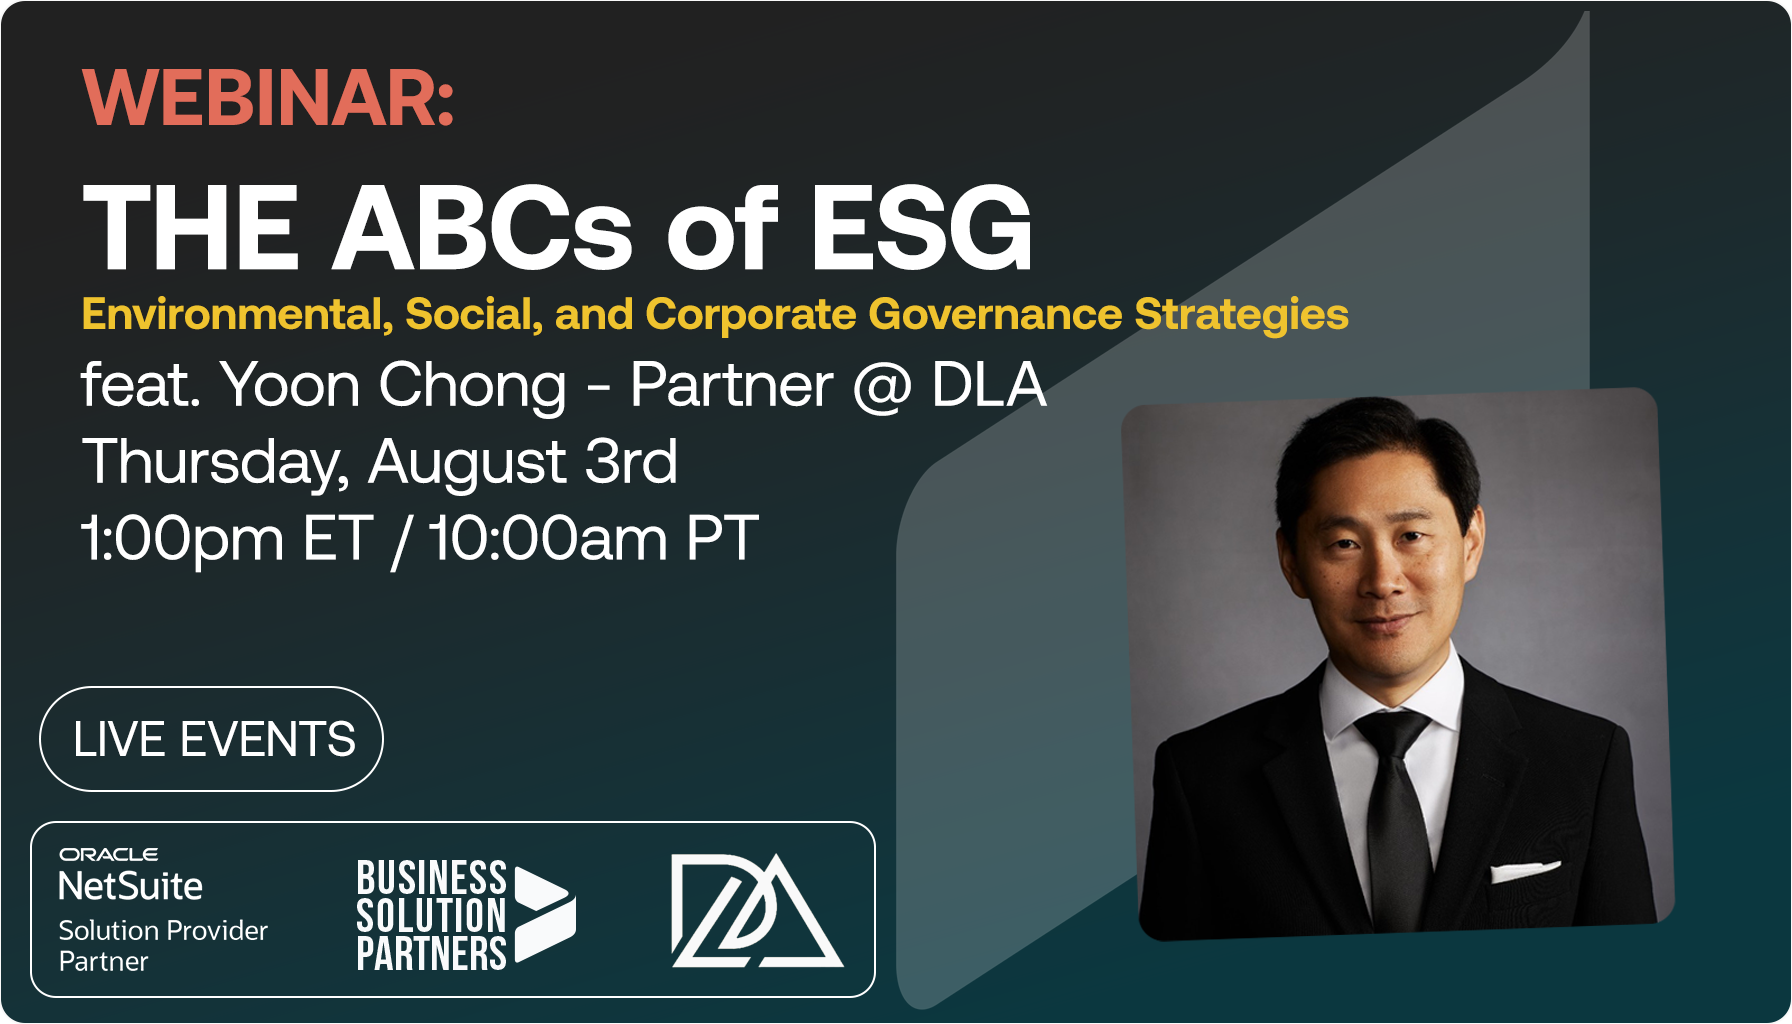 Join BSP and DLA for The ABCs of ESG - A webinar about Environmental, Social and Corporate Governance